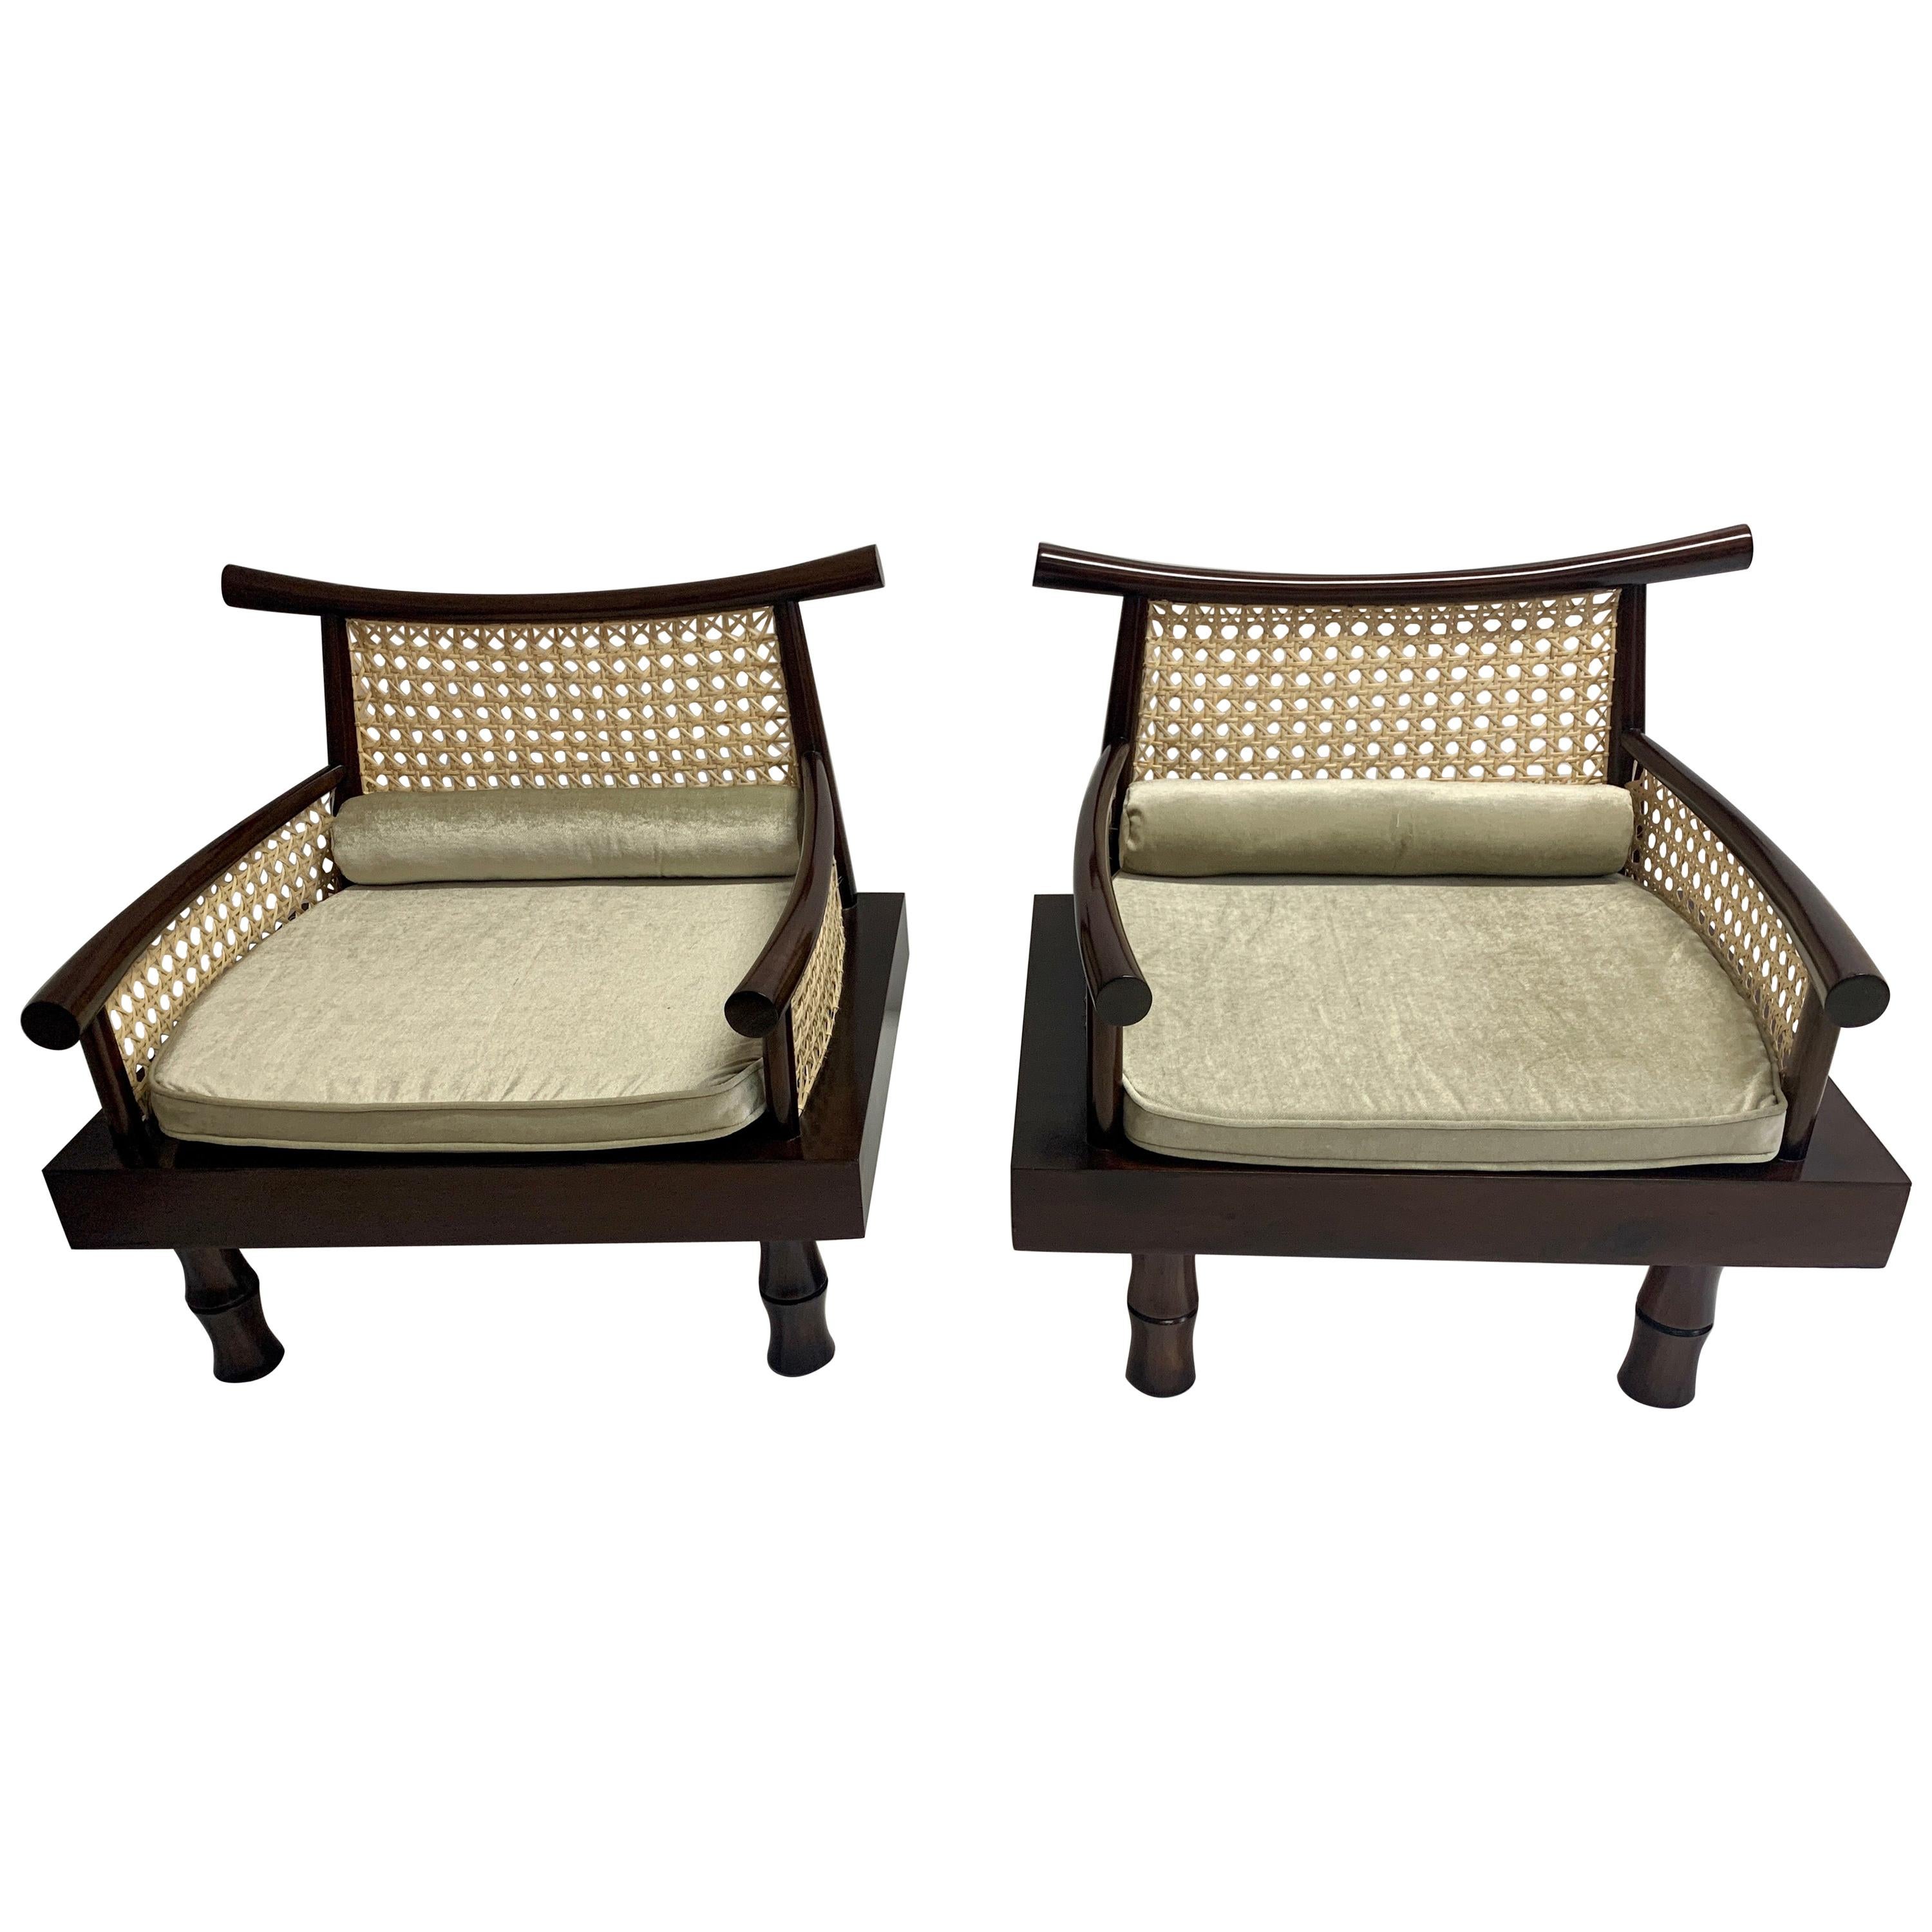 Pair of Armchairs "Oriental Collection" by Frank Kyle